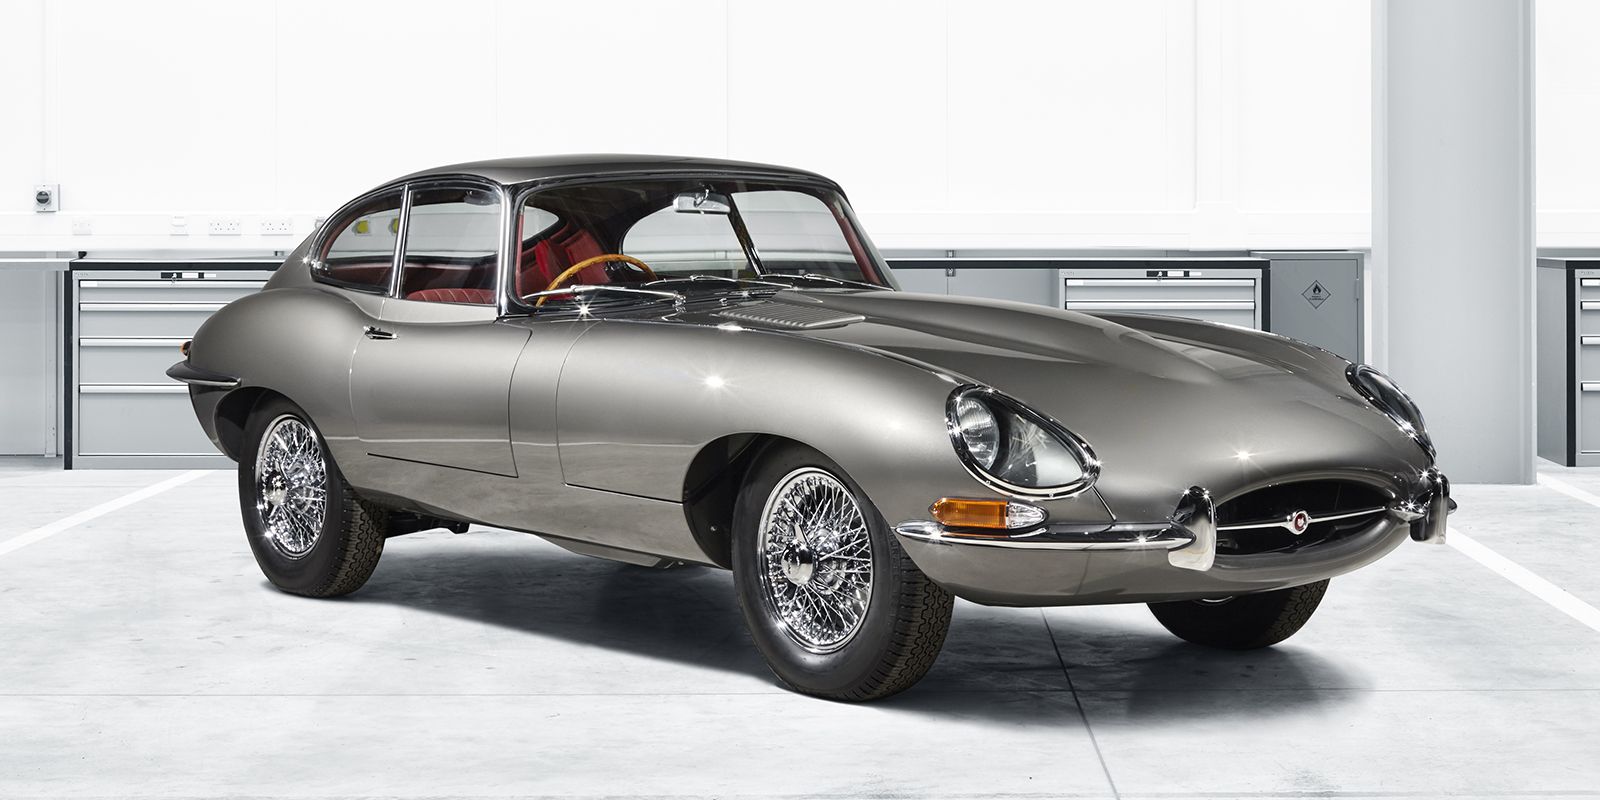 Jaguar Will Sell You a Perfectly Restored E-Type For Just $355,000